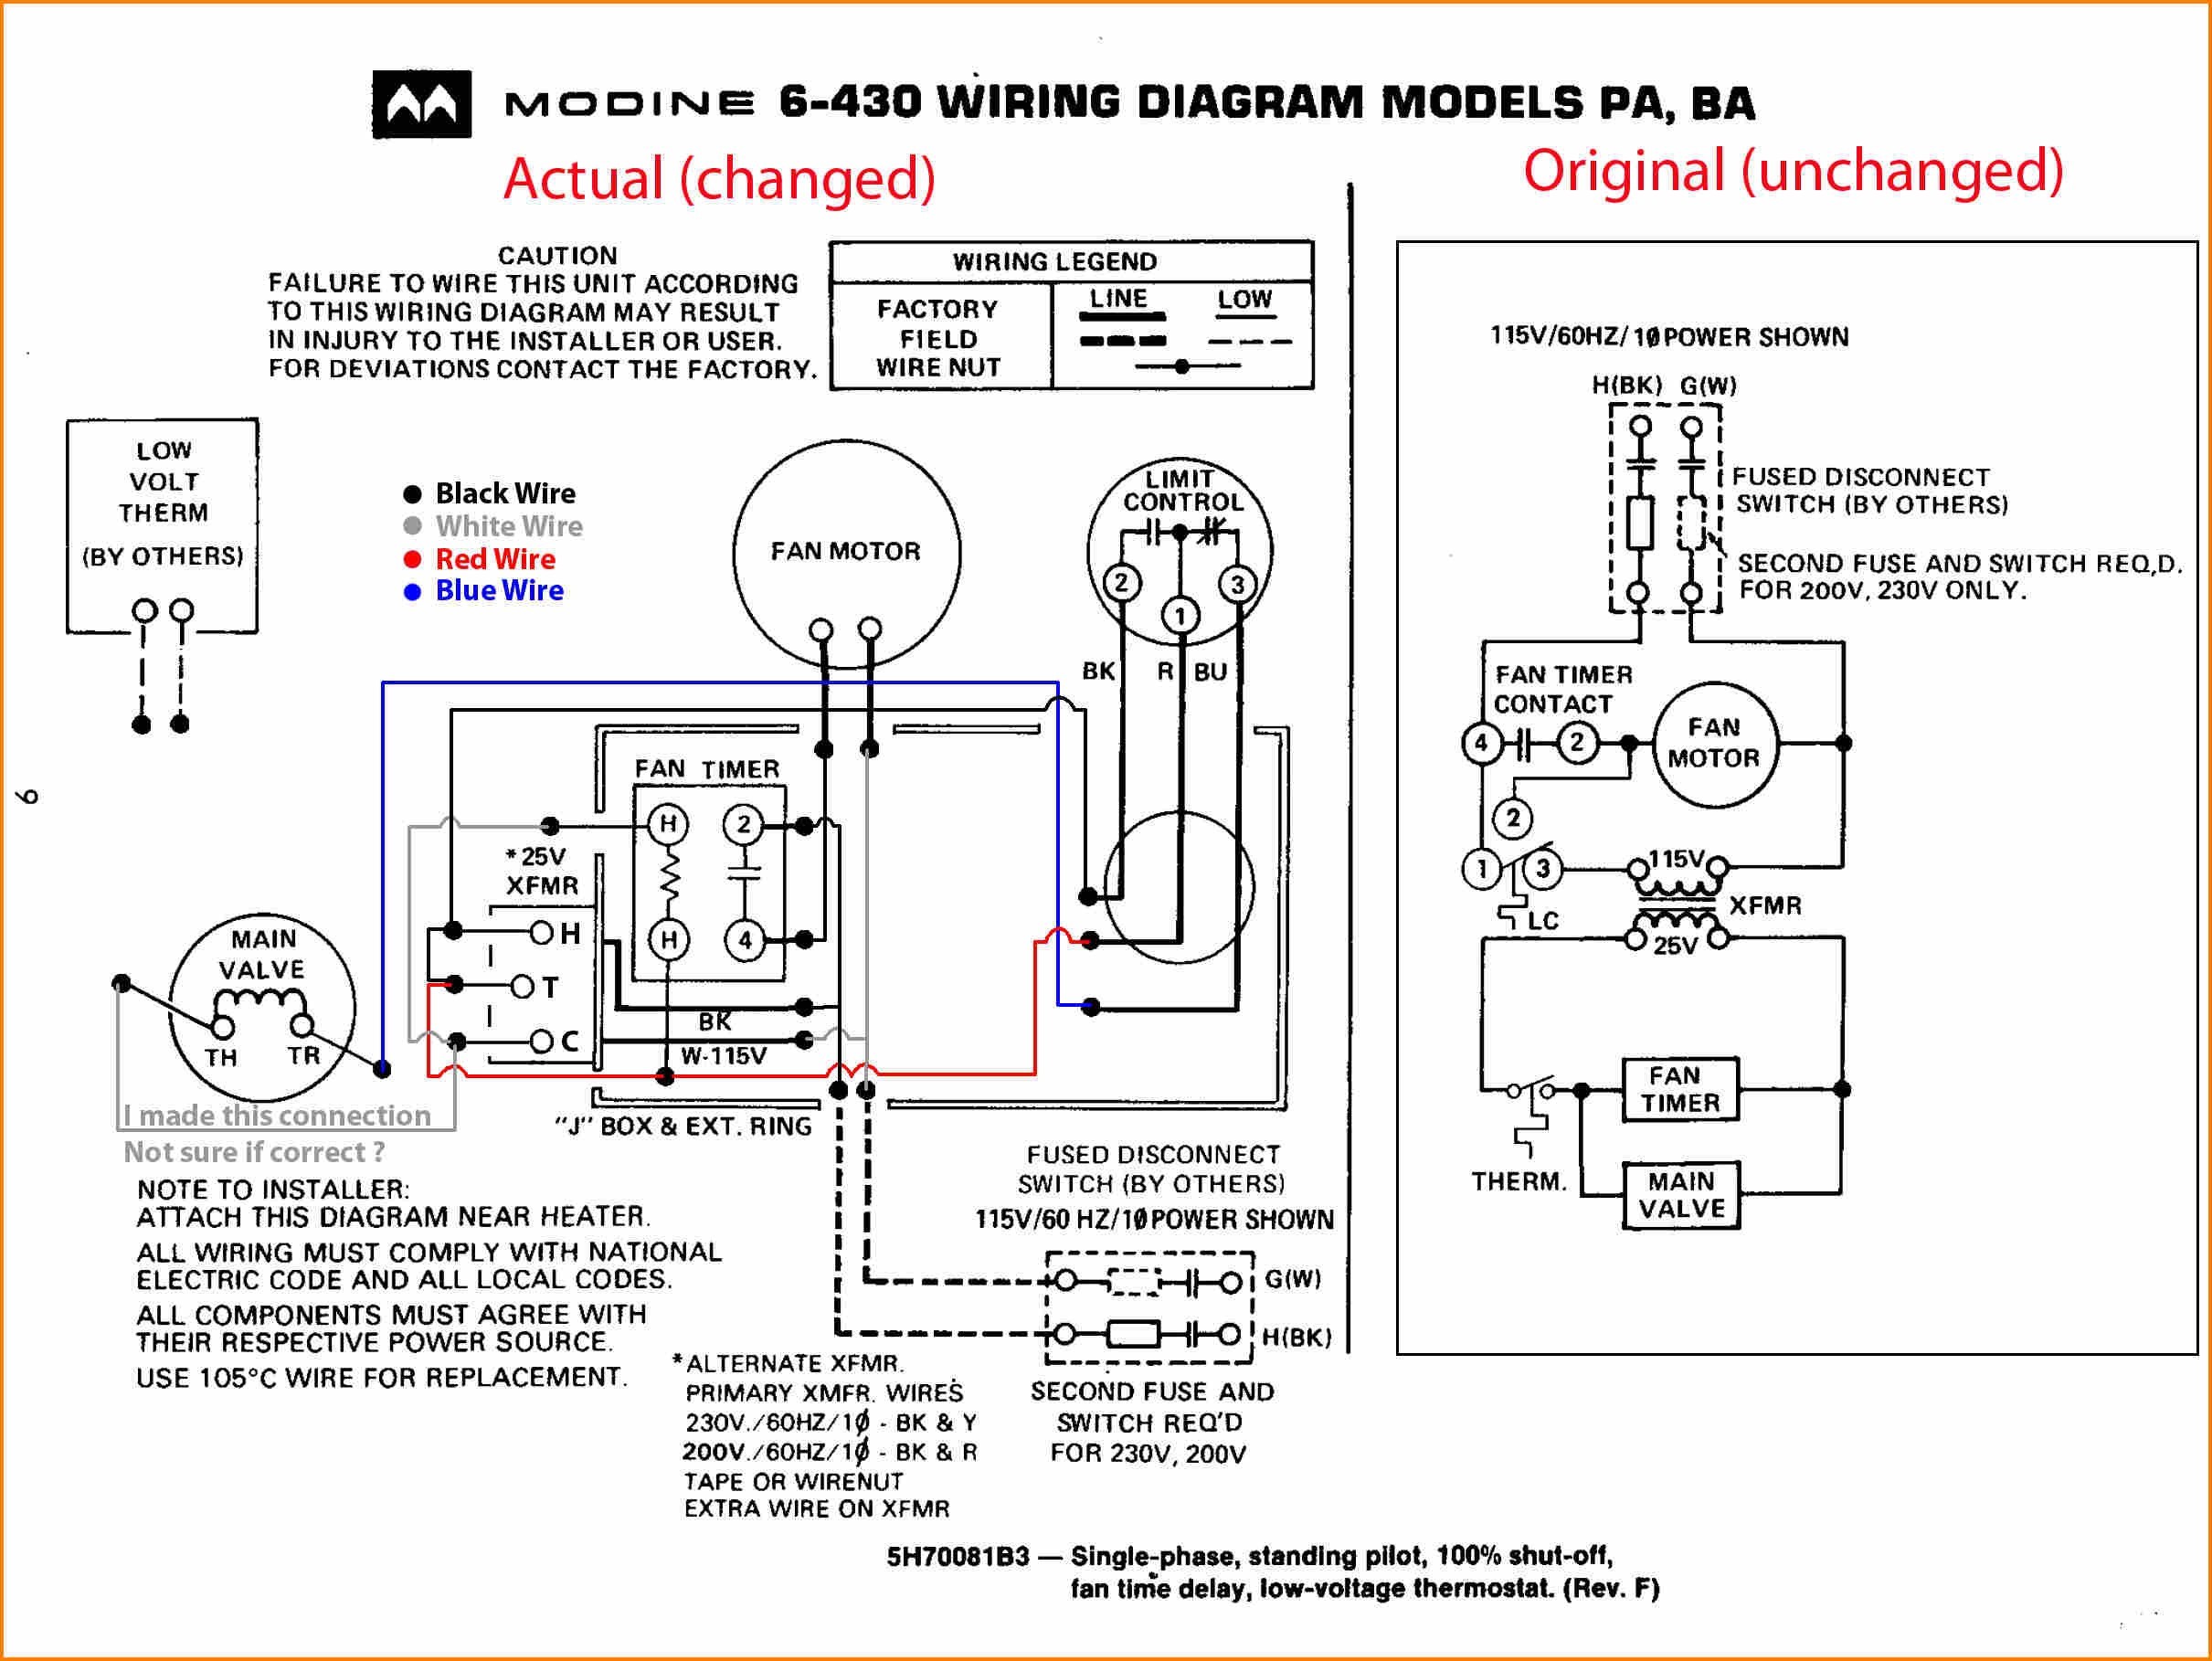 Gas Fired Furnace Wiring Diagram Refrence Gas Furnace thermocouple Wiring Diagram Refrence Hanging Furnace